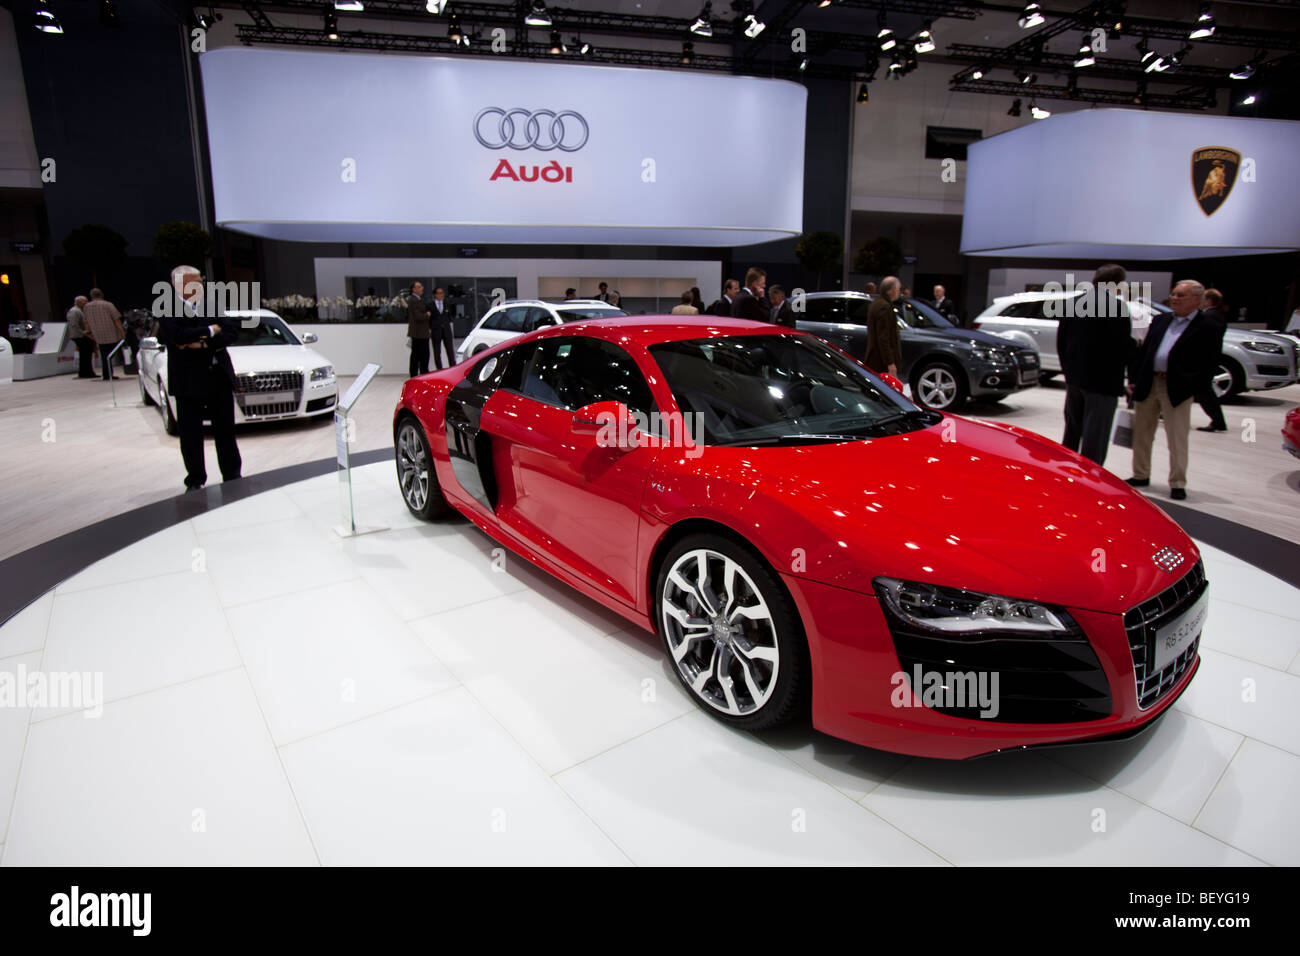 Audi R8 5.2 FSI quattro is seen at an automobile show of the Volkswagen AG in Hamburg, Germany. Stock Photo